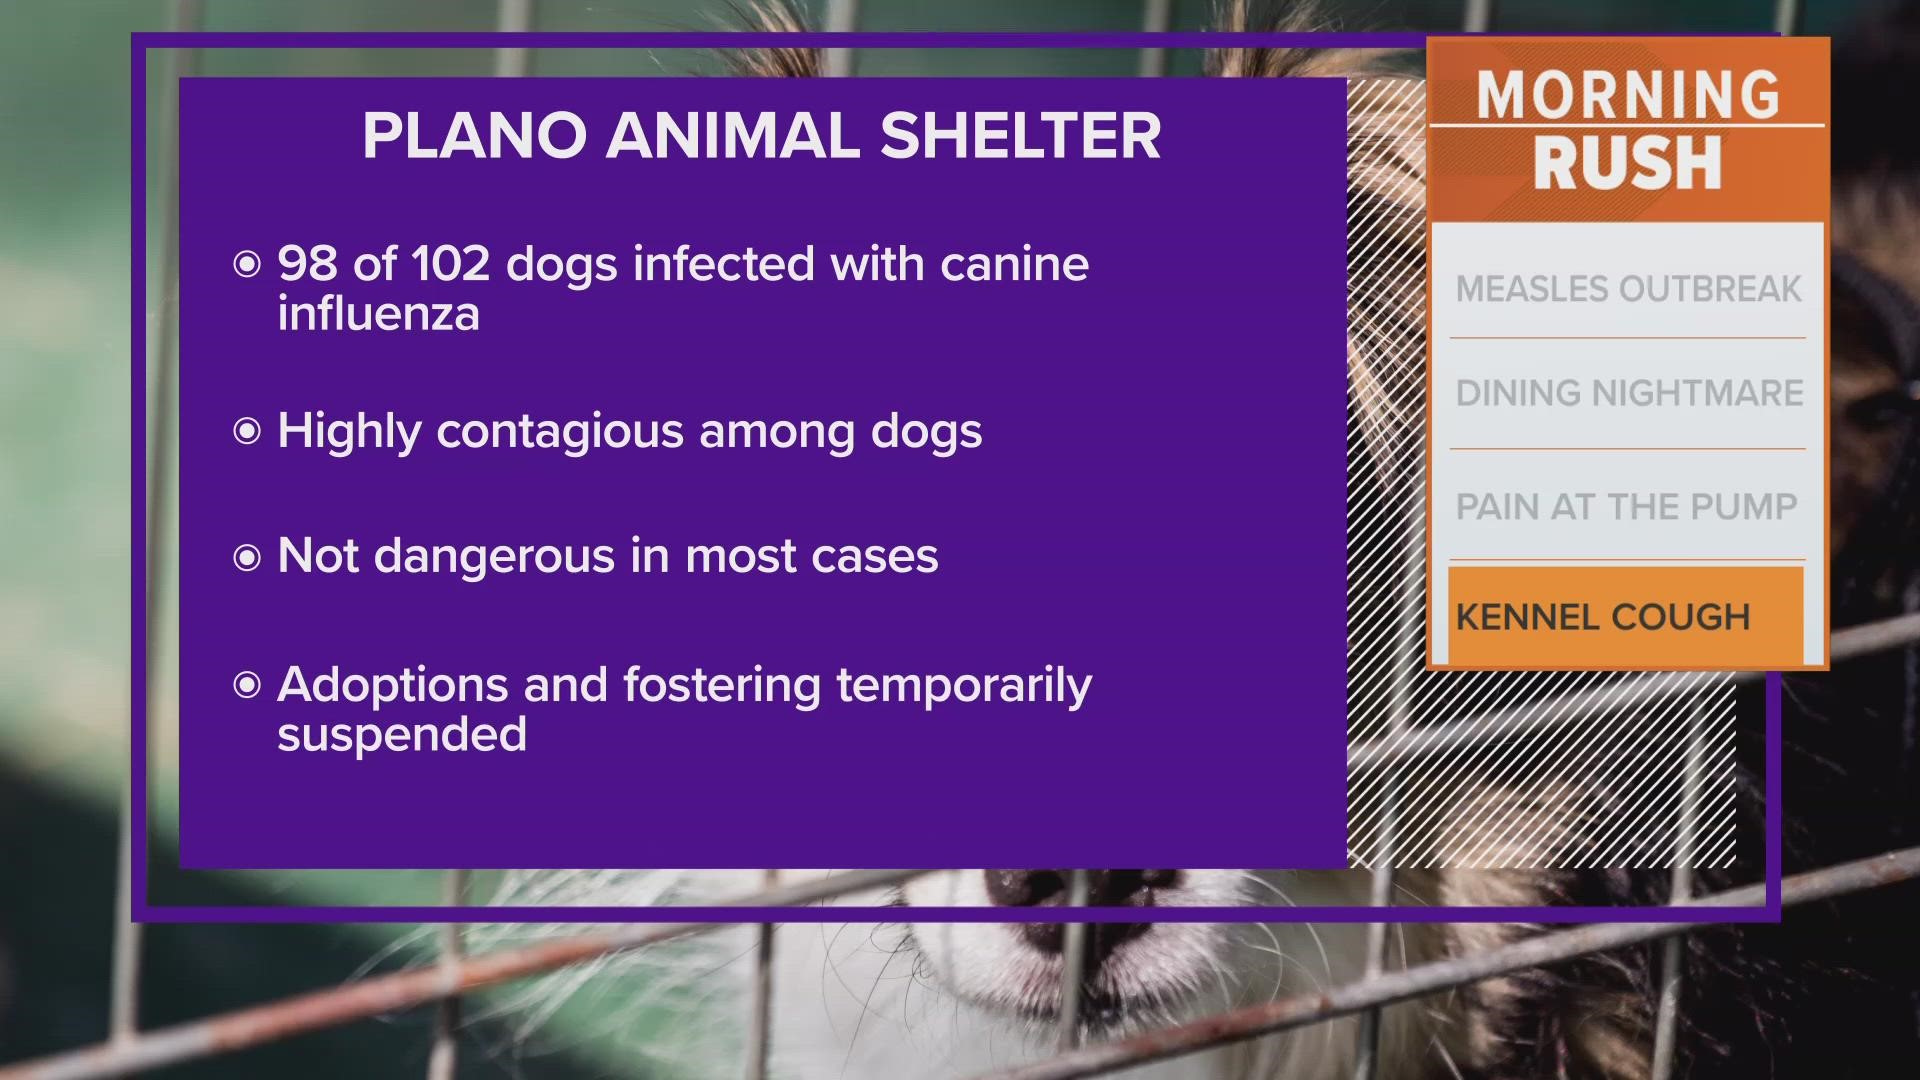 Plano Animal Services strongly encourages local dog owners to contact their veterinarians to discuss getting a canine influenza vaccination for their pets.